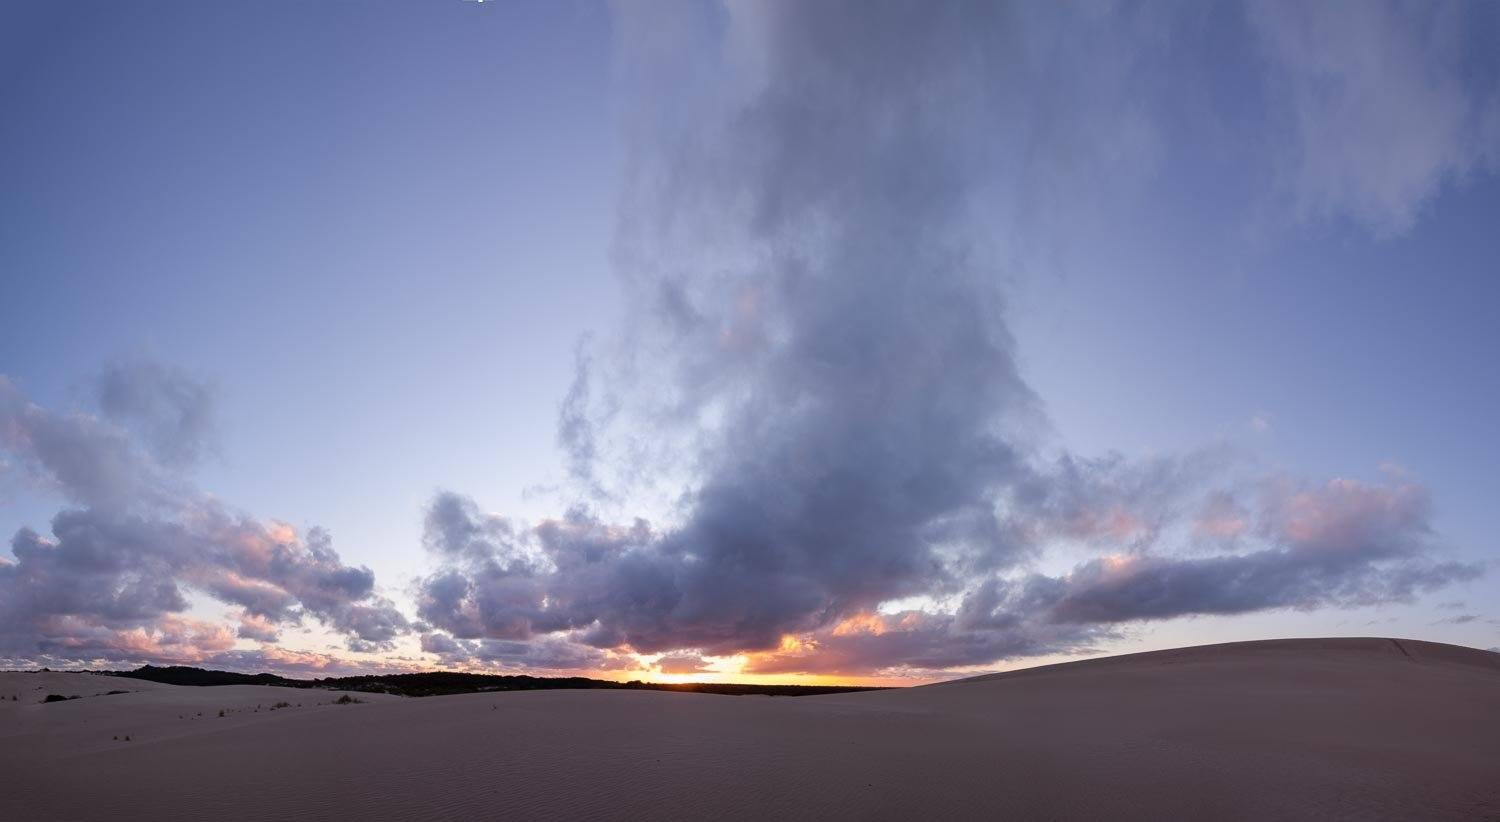 A desert with giant smoky clouds over, and a view of sunset in the far background, Little Sahara Dusk - Kangaroo Island SA